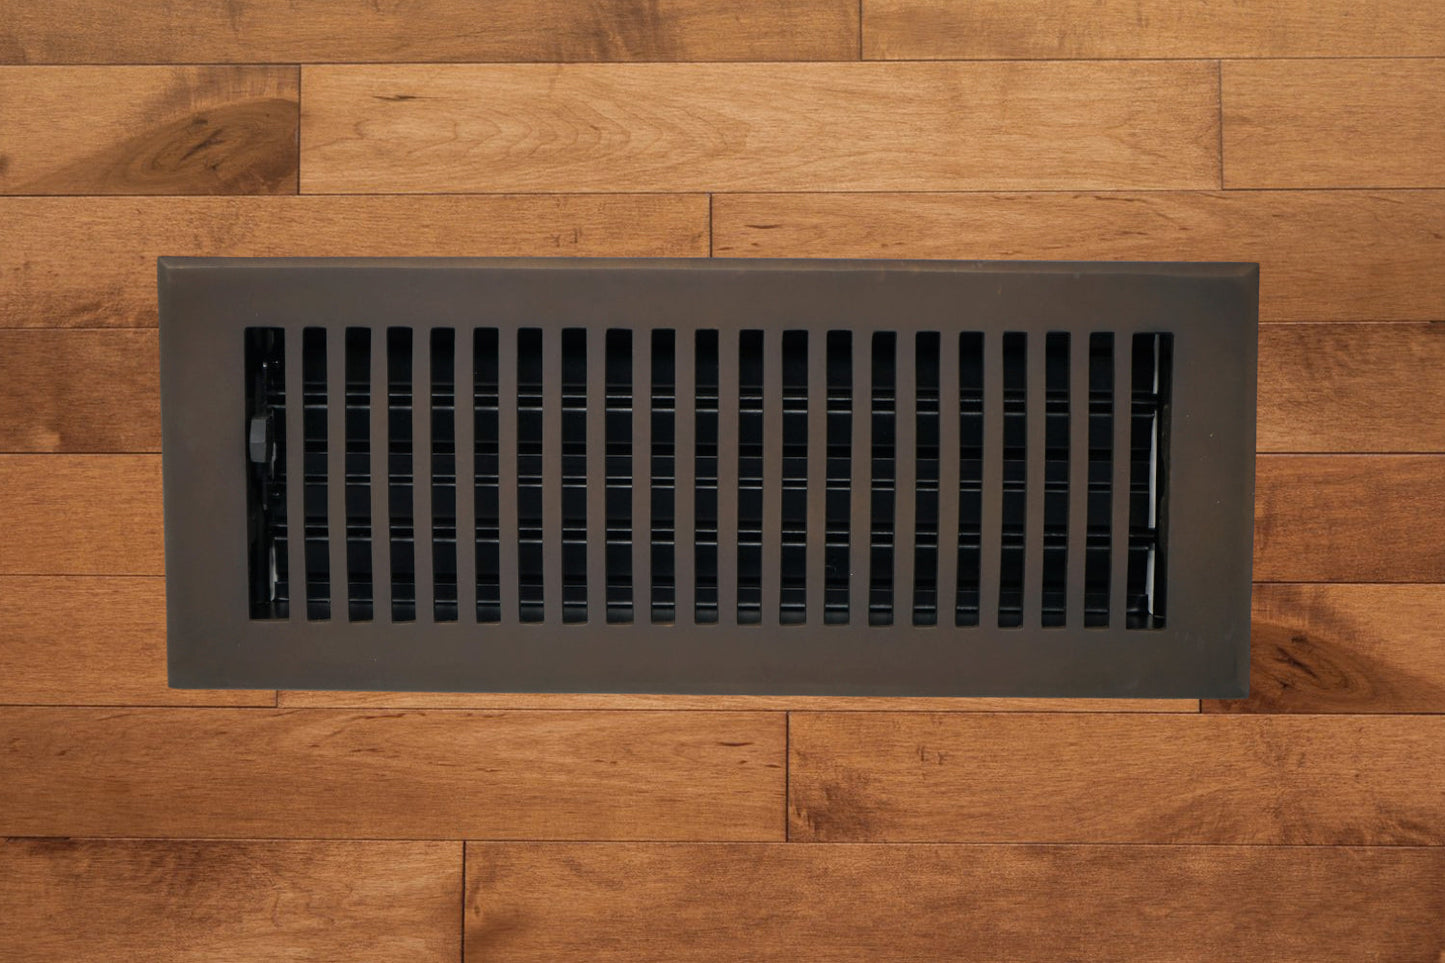 Cast Brass Contemporary Vent Covers - Oil Rubbed Bronze